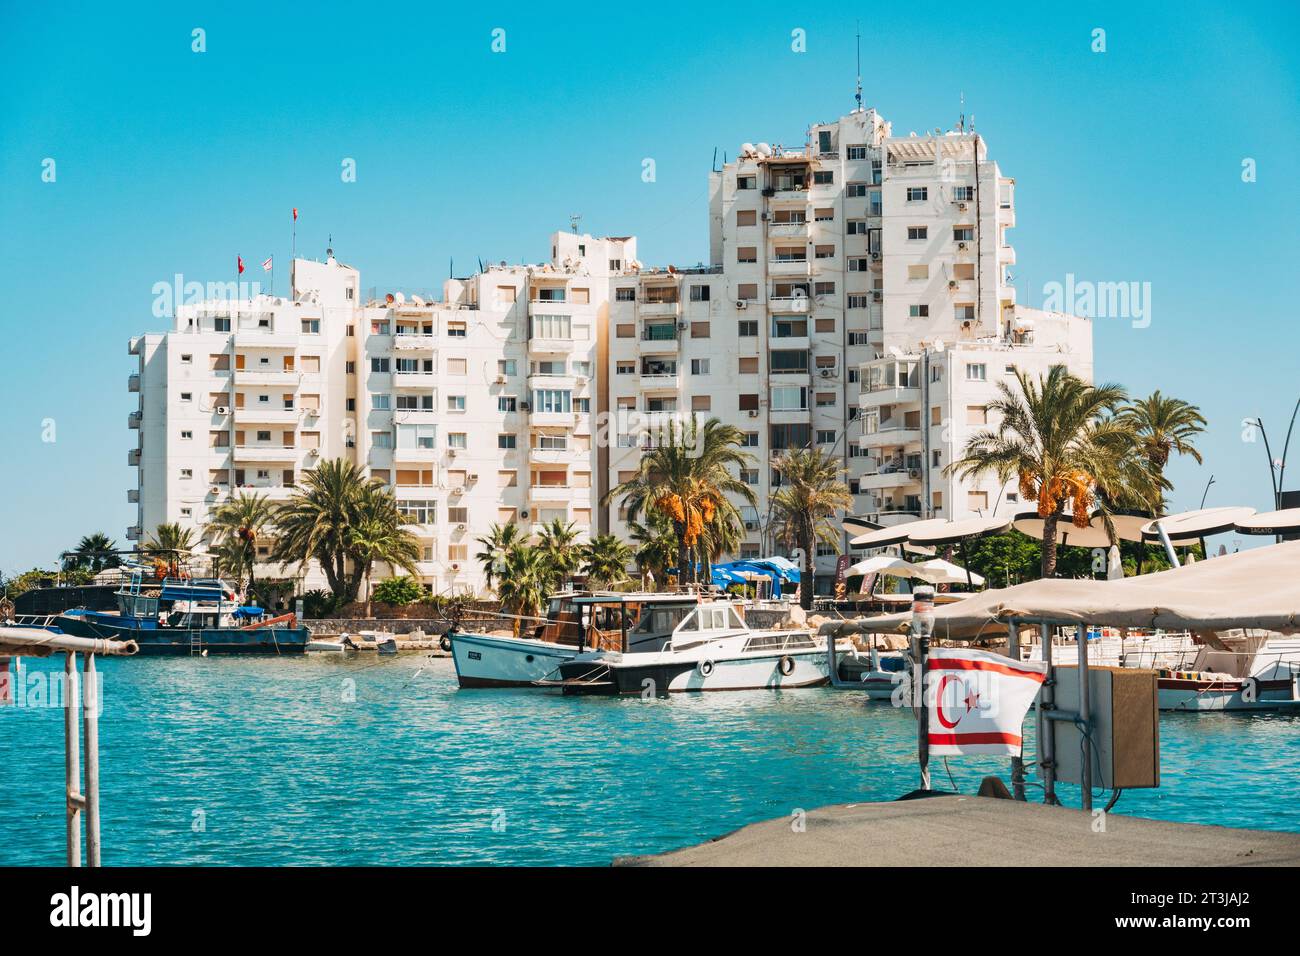 apartment blocks at a marina in Famagusta, Northern Cyprus. A Turkish Cypriot flag is seen flying on the marina Stock Photo